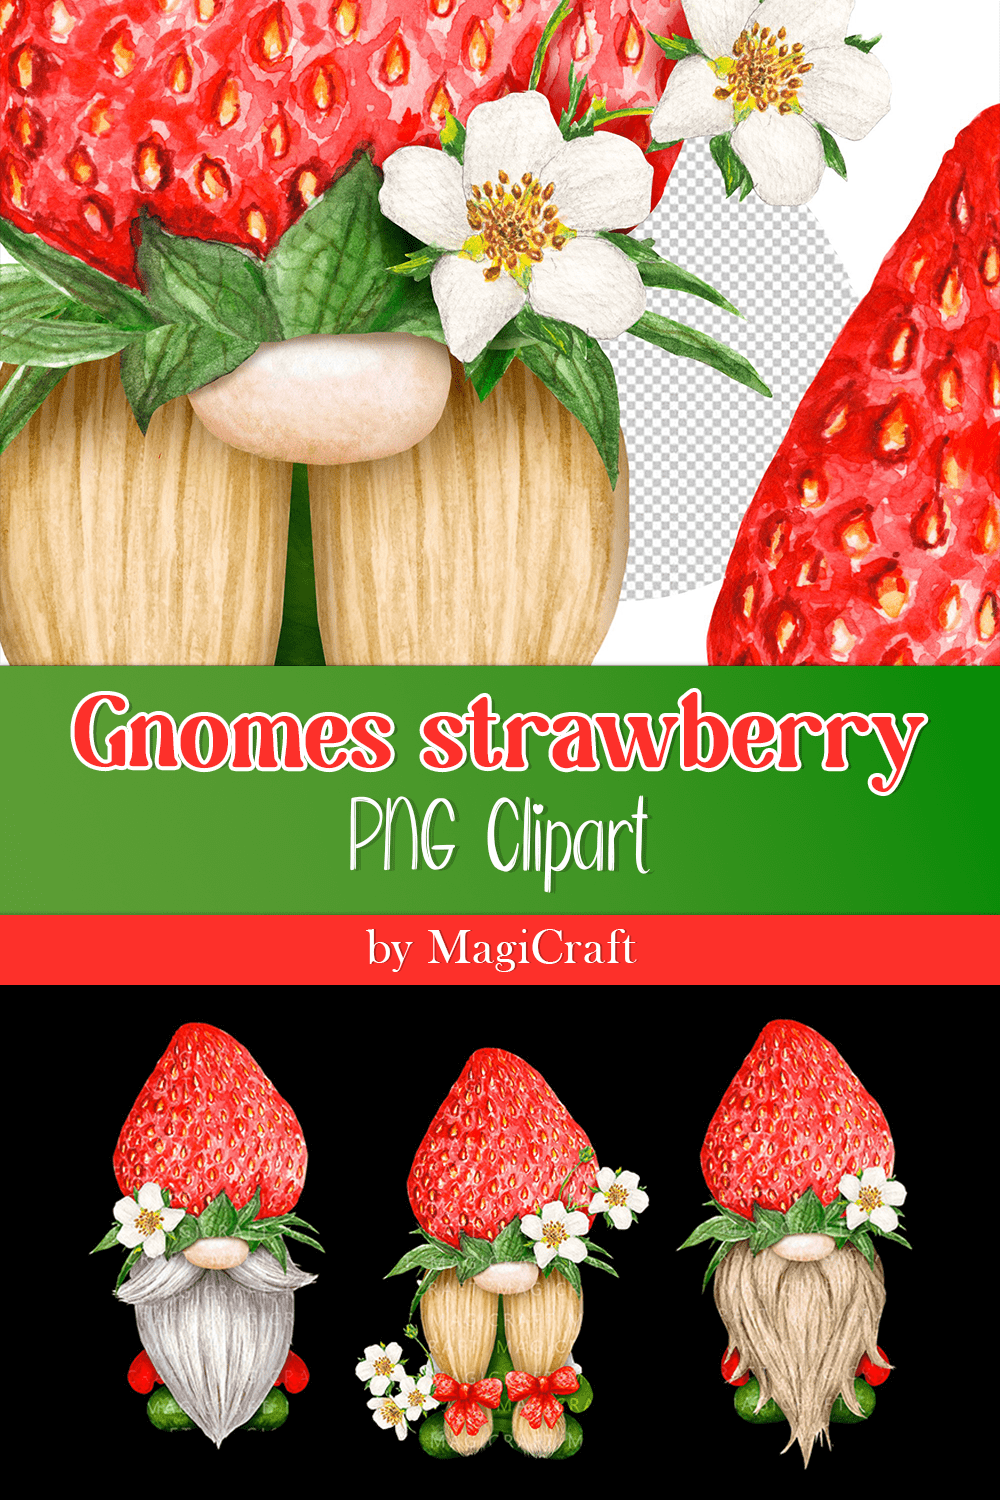 Gnomes Strawberry Png Clipart Watercolor Gonks Strawberry - Pinterest.